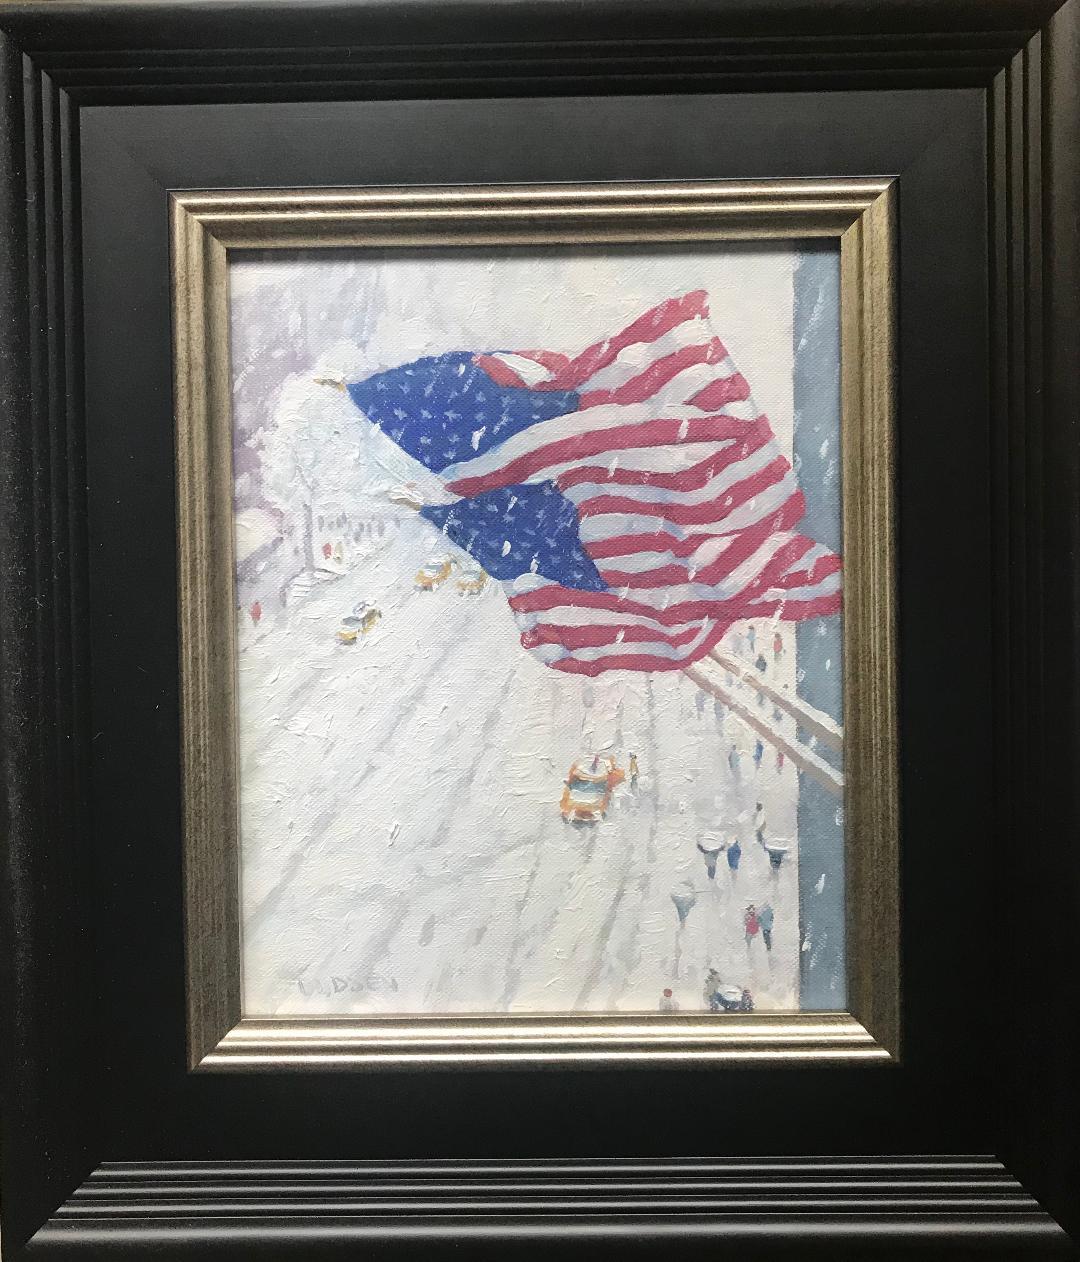 Glory Above the Crowd
An oil painting on canvas panel by award winning contemporary artist Michael Budden that showcases the bustling life and the beautiful flags on a wintry afternoon in NYC. The image measures 10 x 8 unframed and 15.5 x 13.5